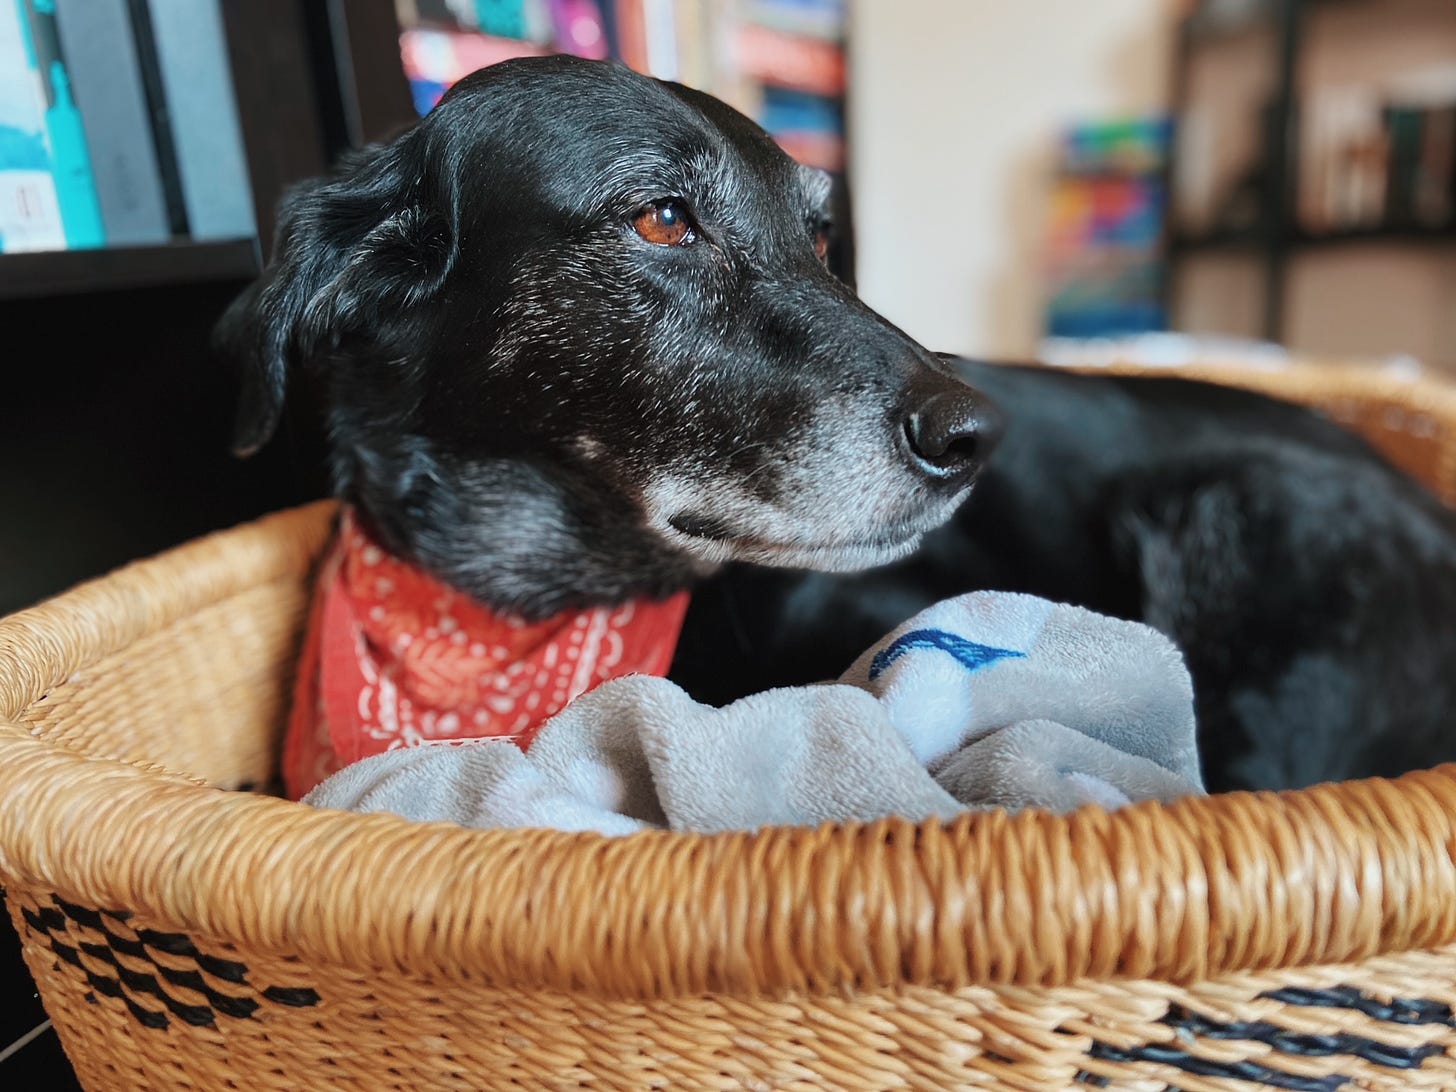 black dog wearing a red bandana laying curled in a basket with a blanket.